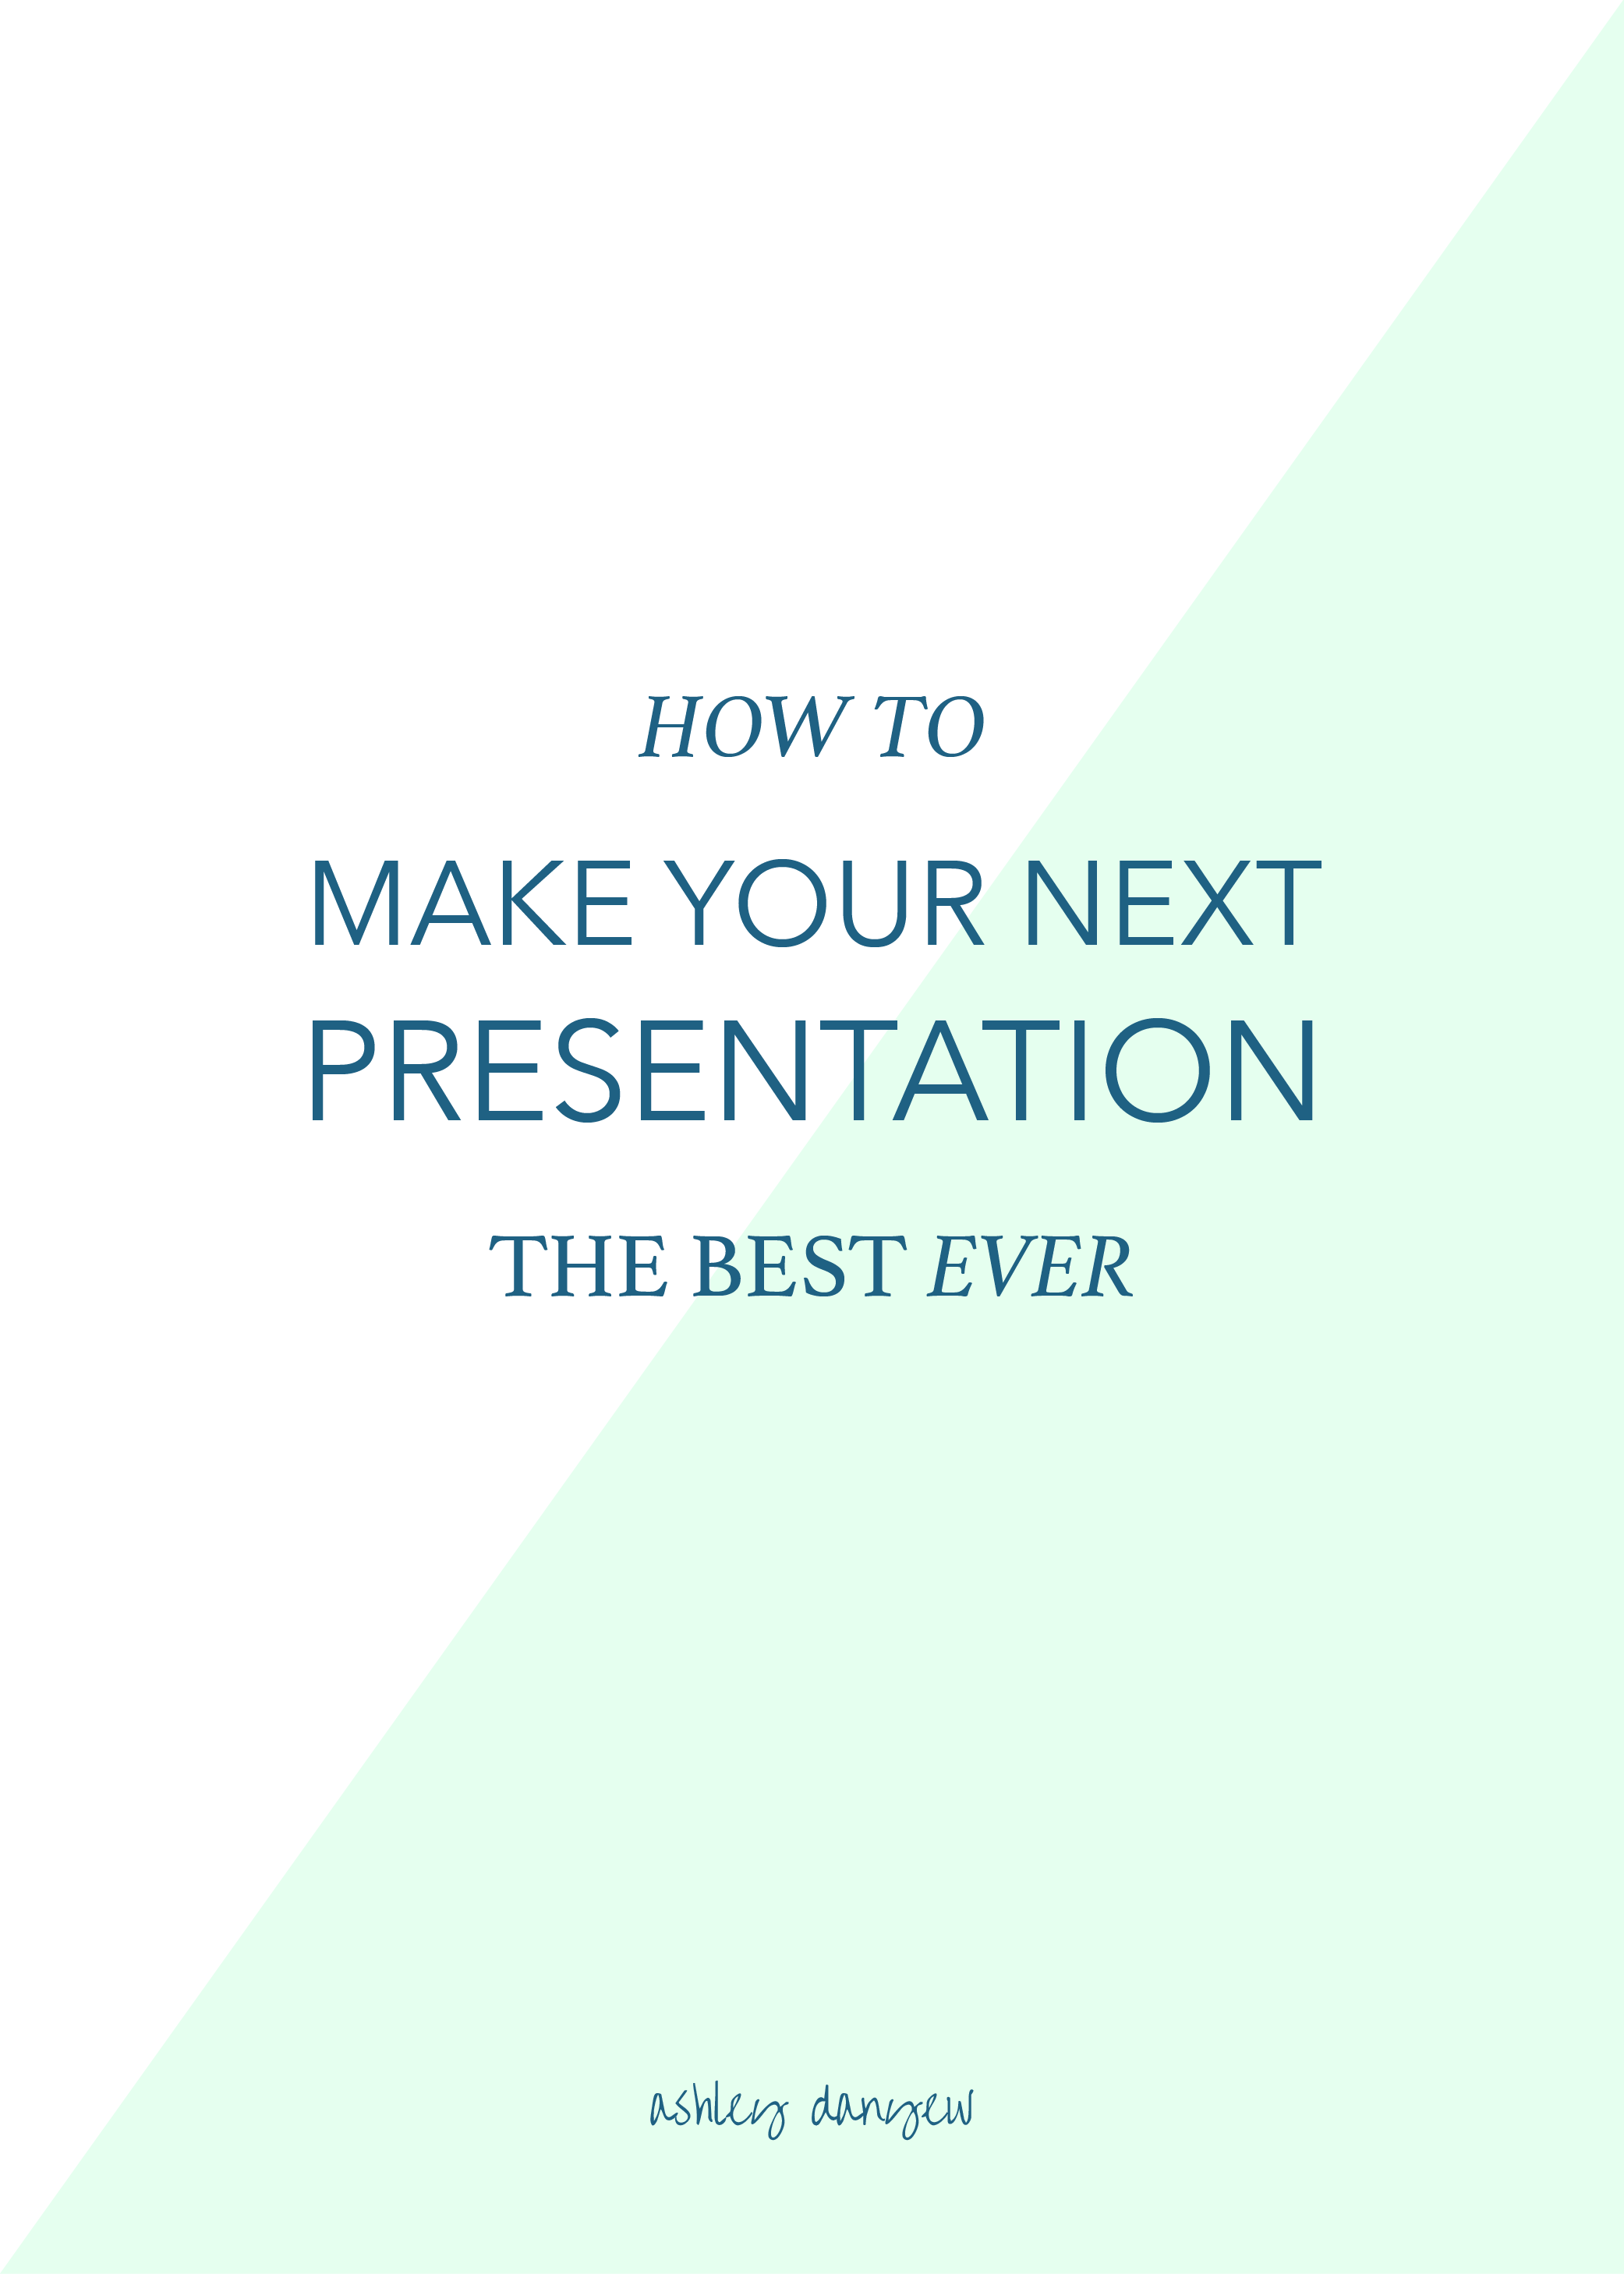 How to Make Your Next Presentation the Best Ever-01.png